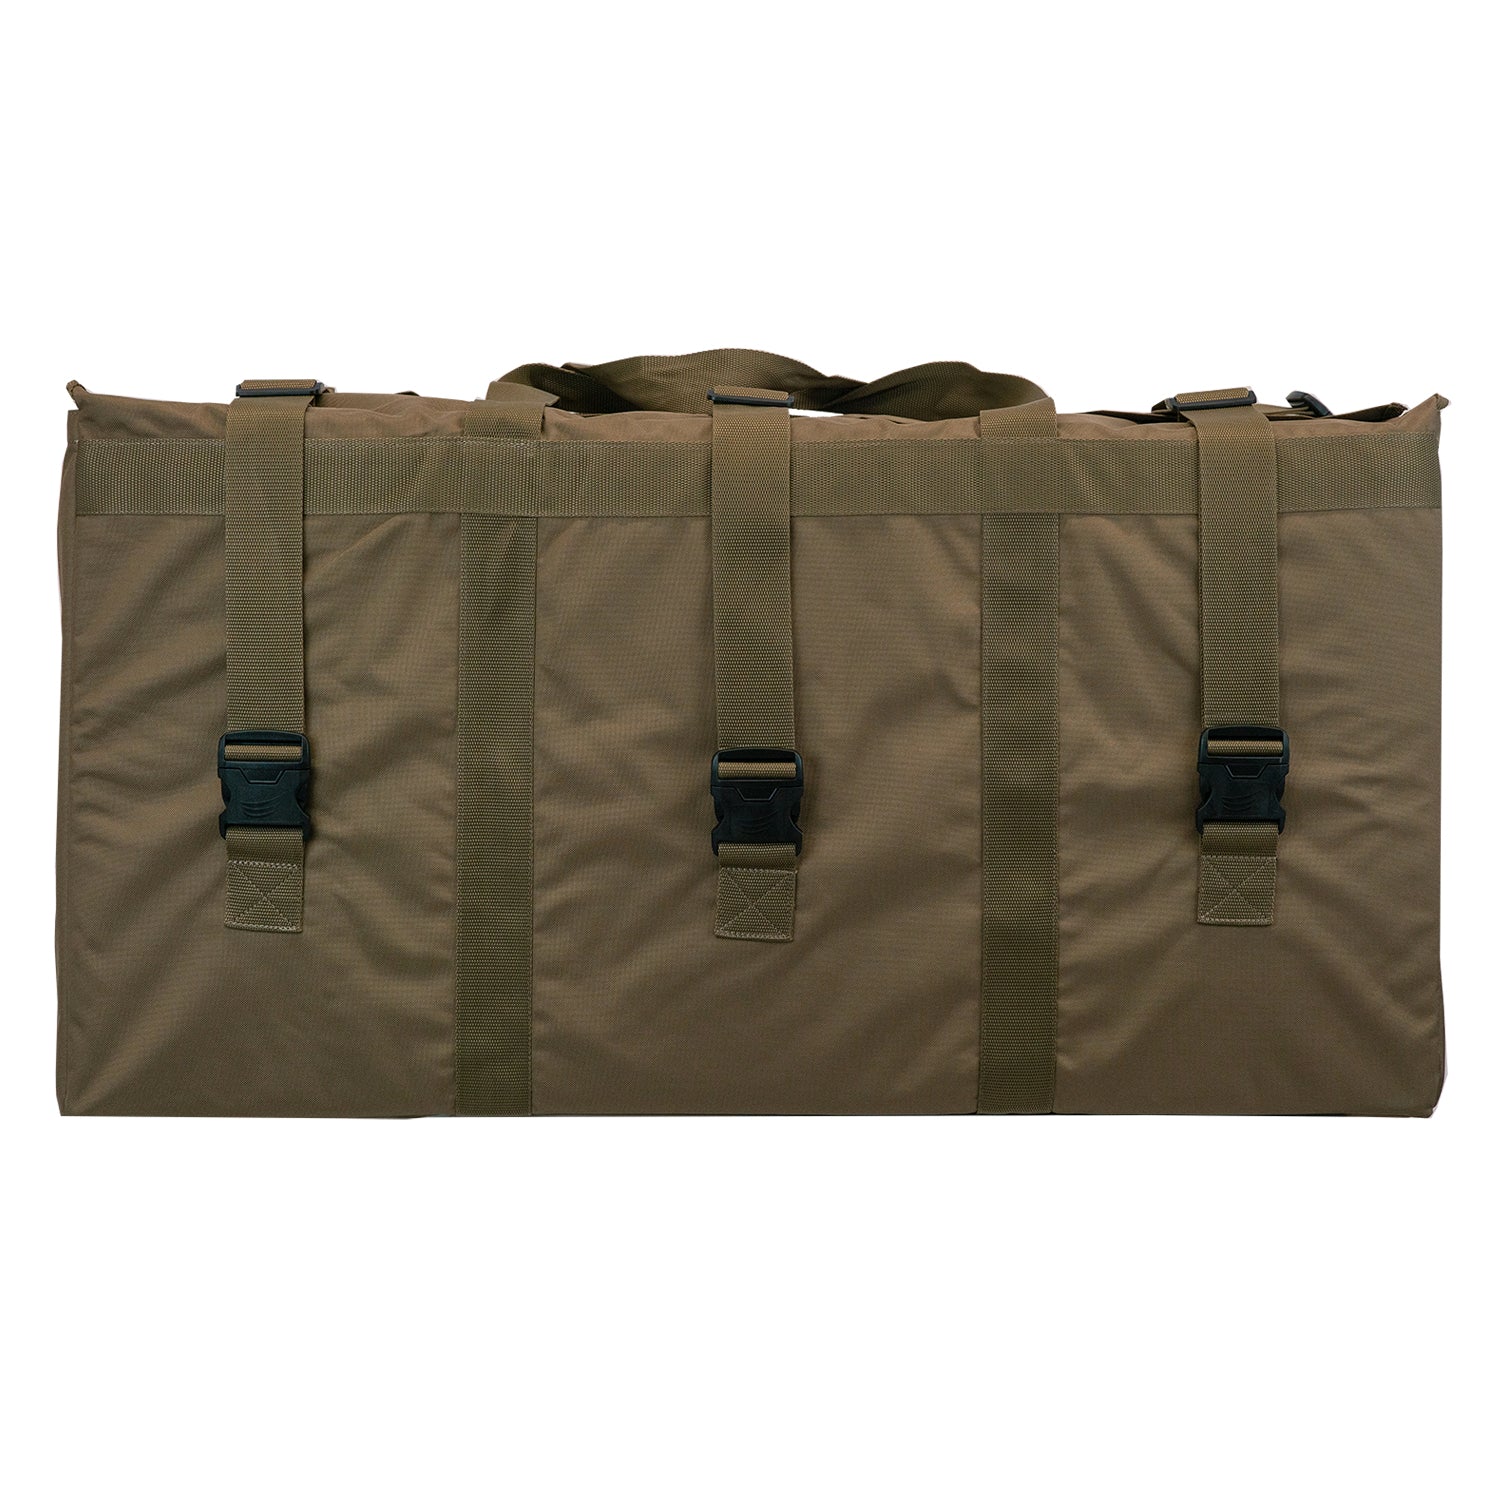 Duck Silhouette/V2 Sleeper Canada Bag | Dive Bomb Industries